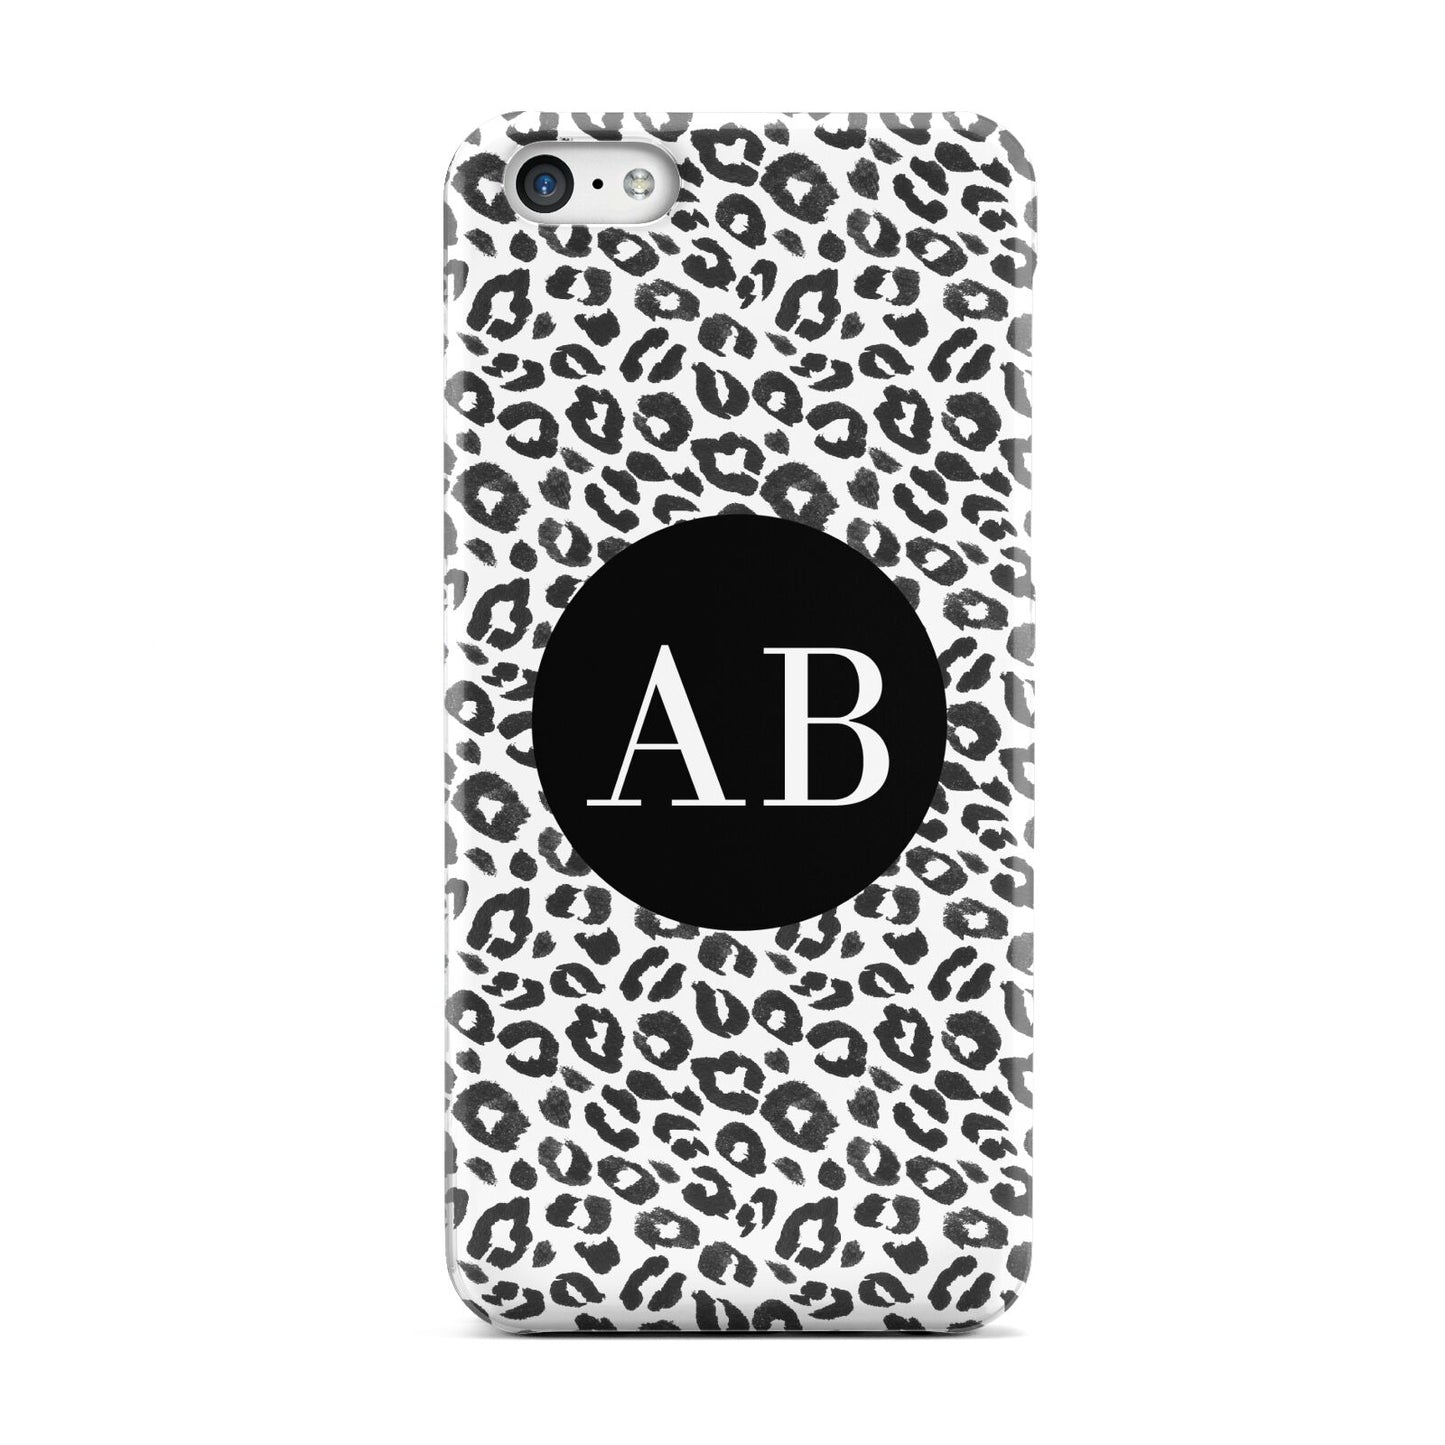 Leopard Print Black and White Apple iPhone 5c Case